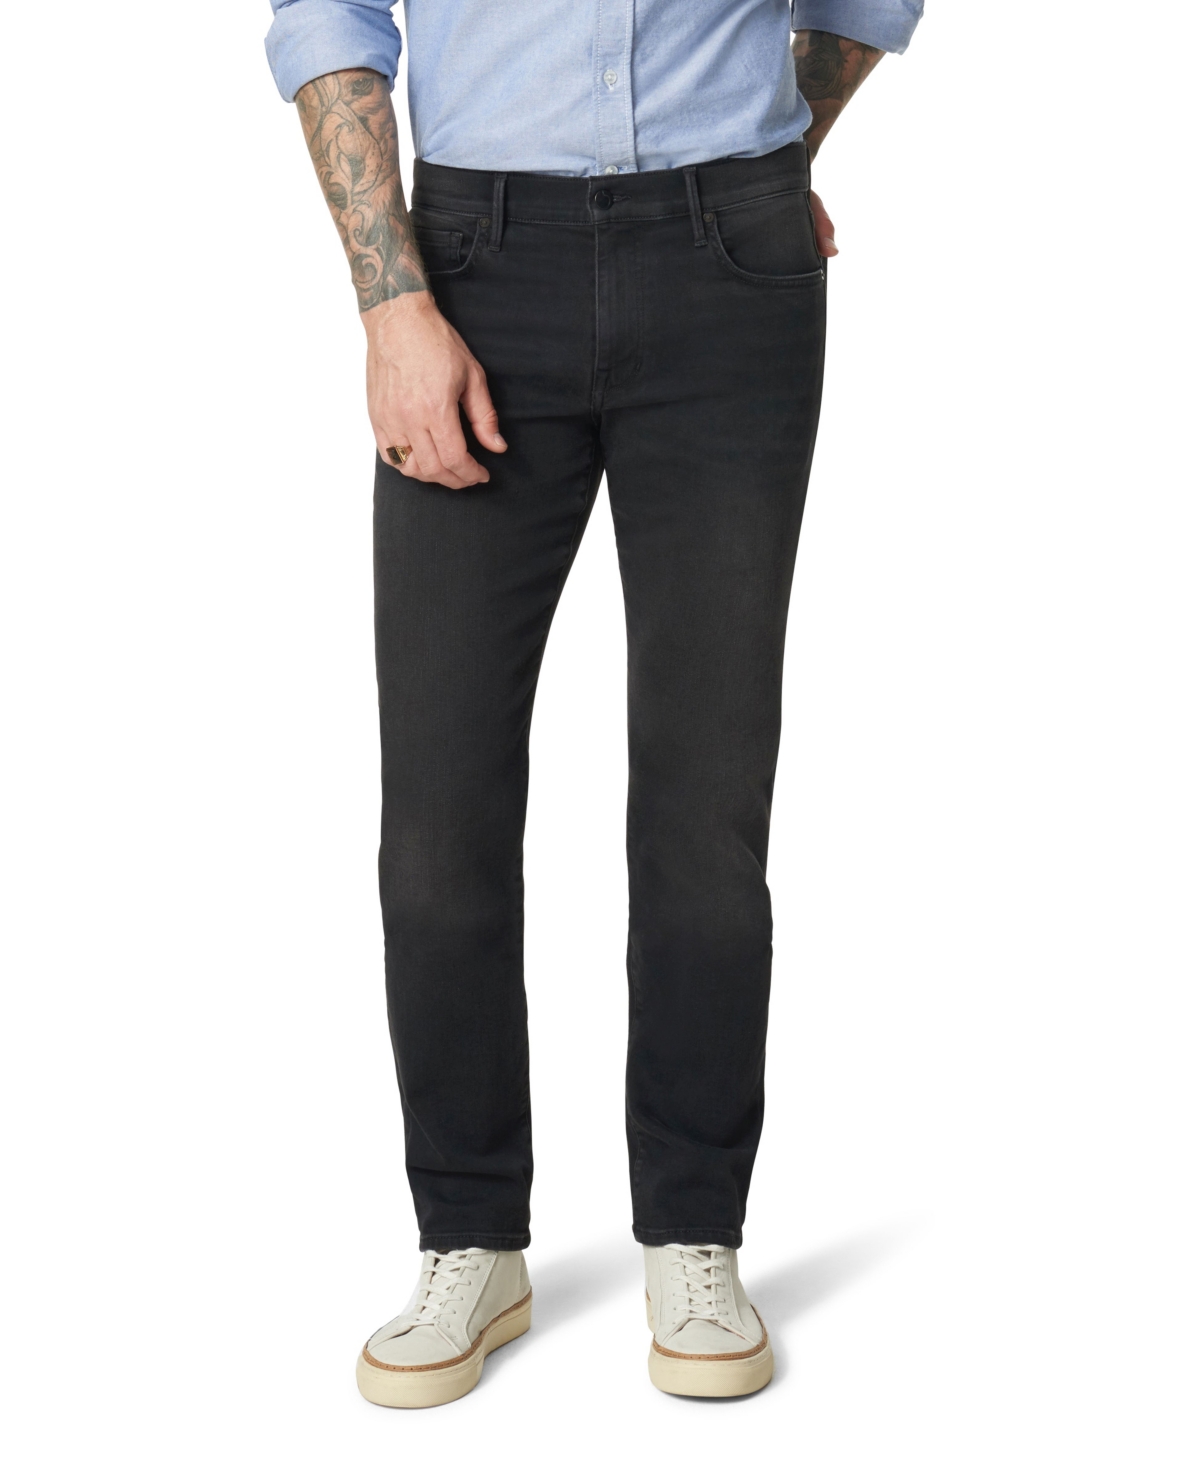 Men's The Asher Slim Fit Stretch Jeans - Vardy